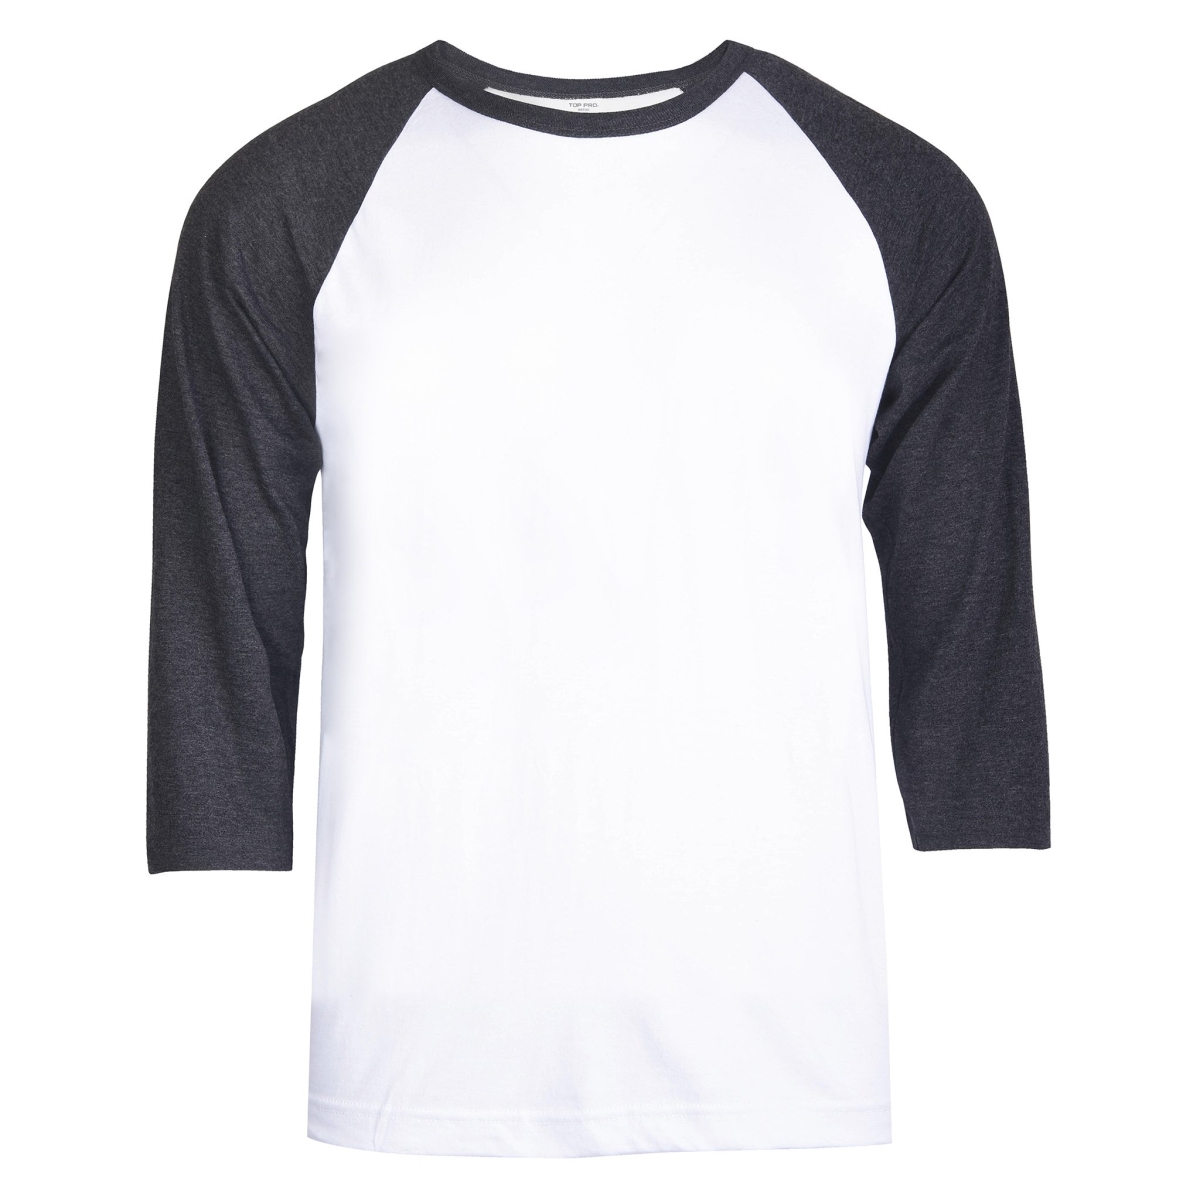 Picture of 247 Frenzy 247-MBT001 CGW-MD Mens Essentials Top Pro 0.75 Sleeve Raglan Baseball T-Shirt&#44; Charcoal Gray & White - Medium